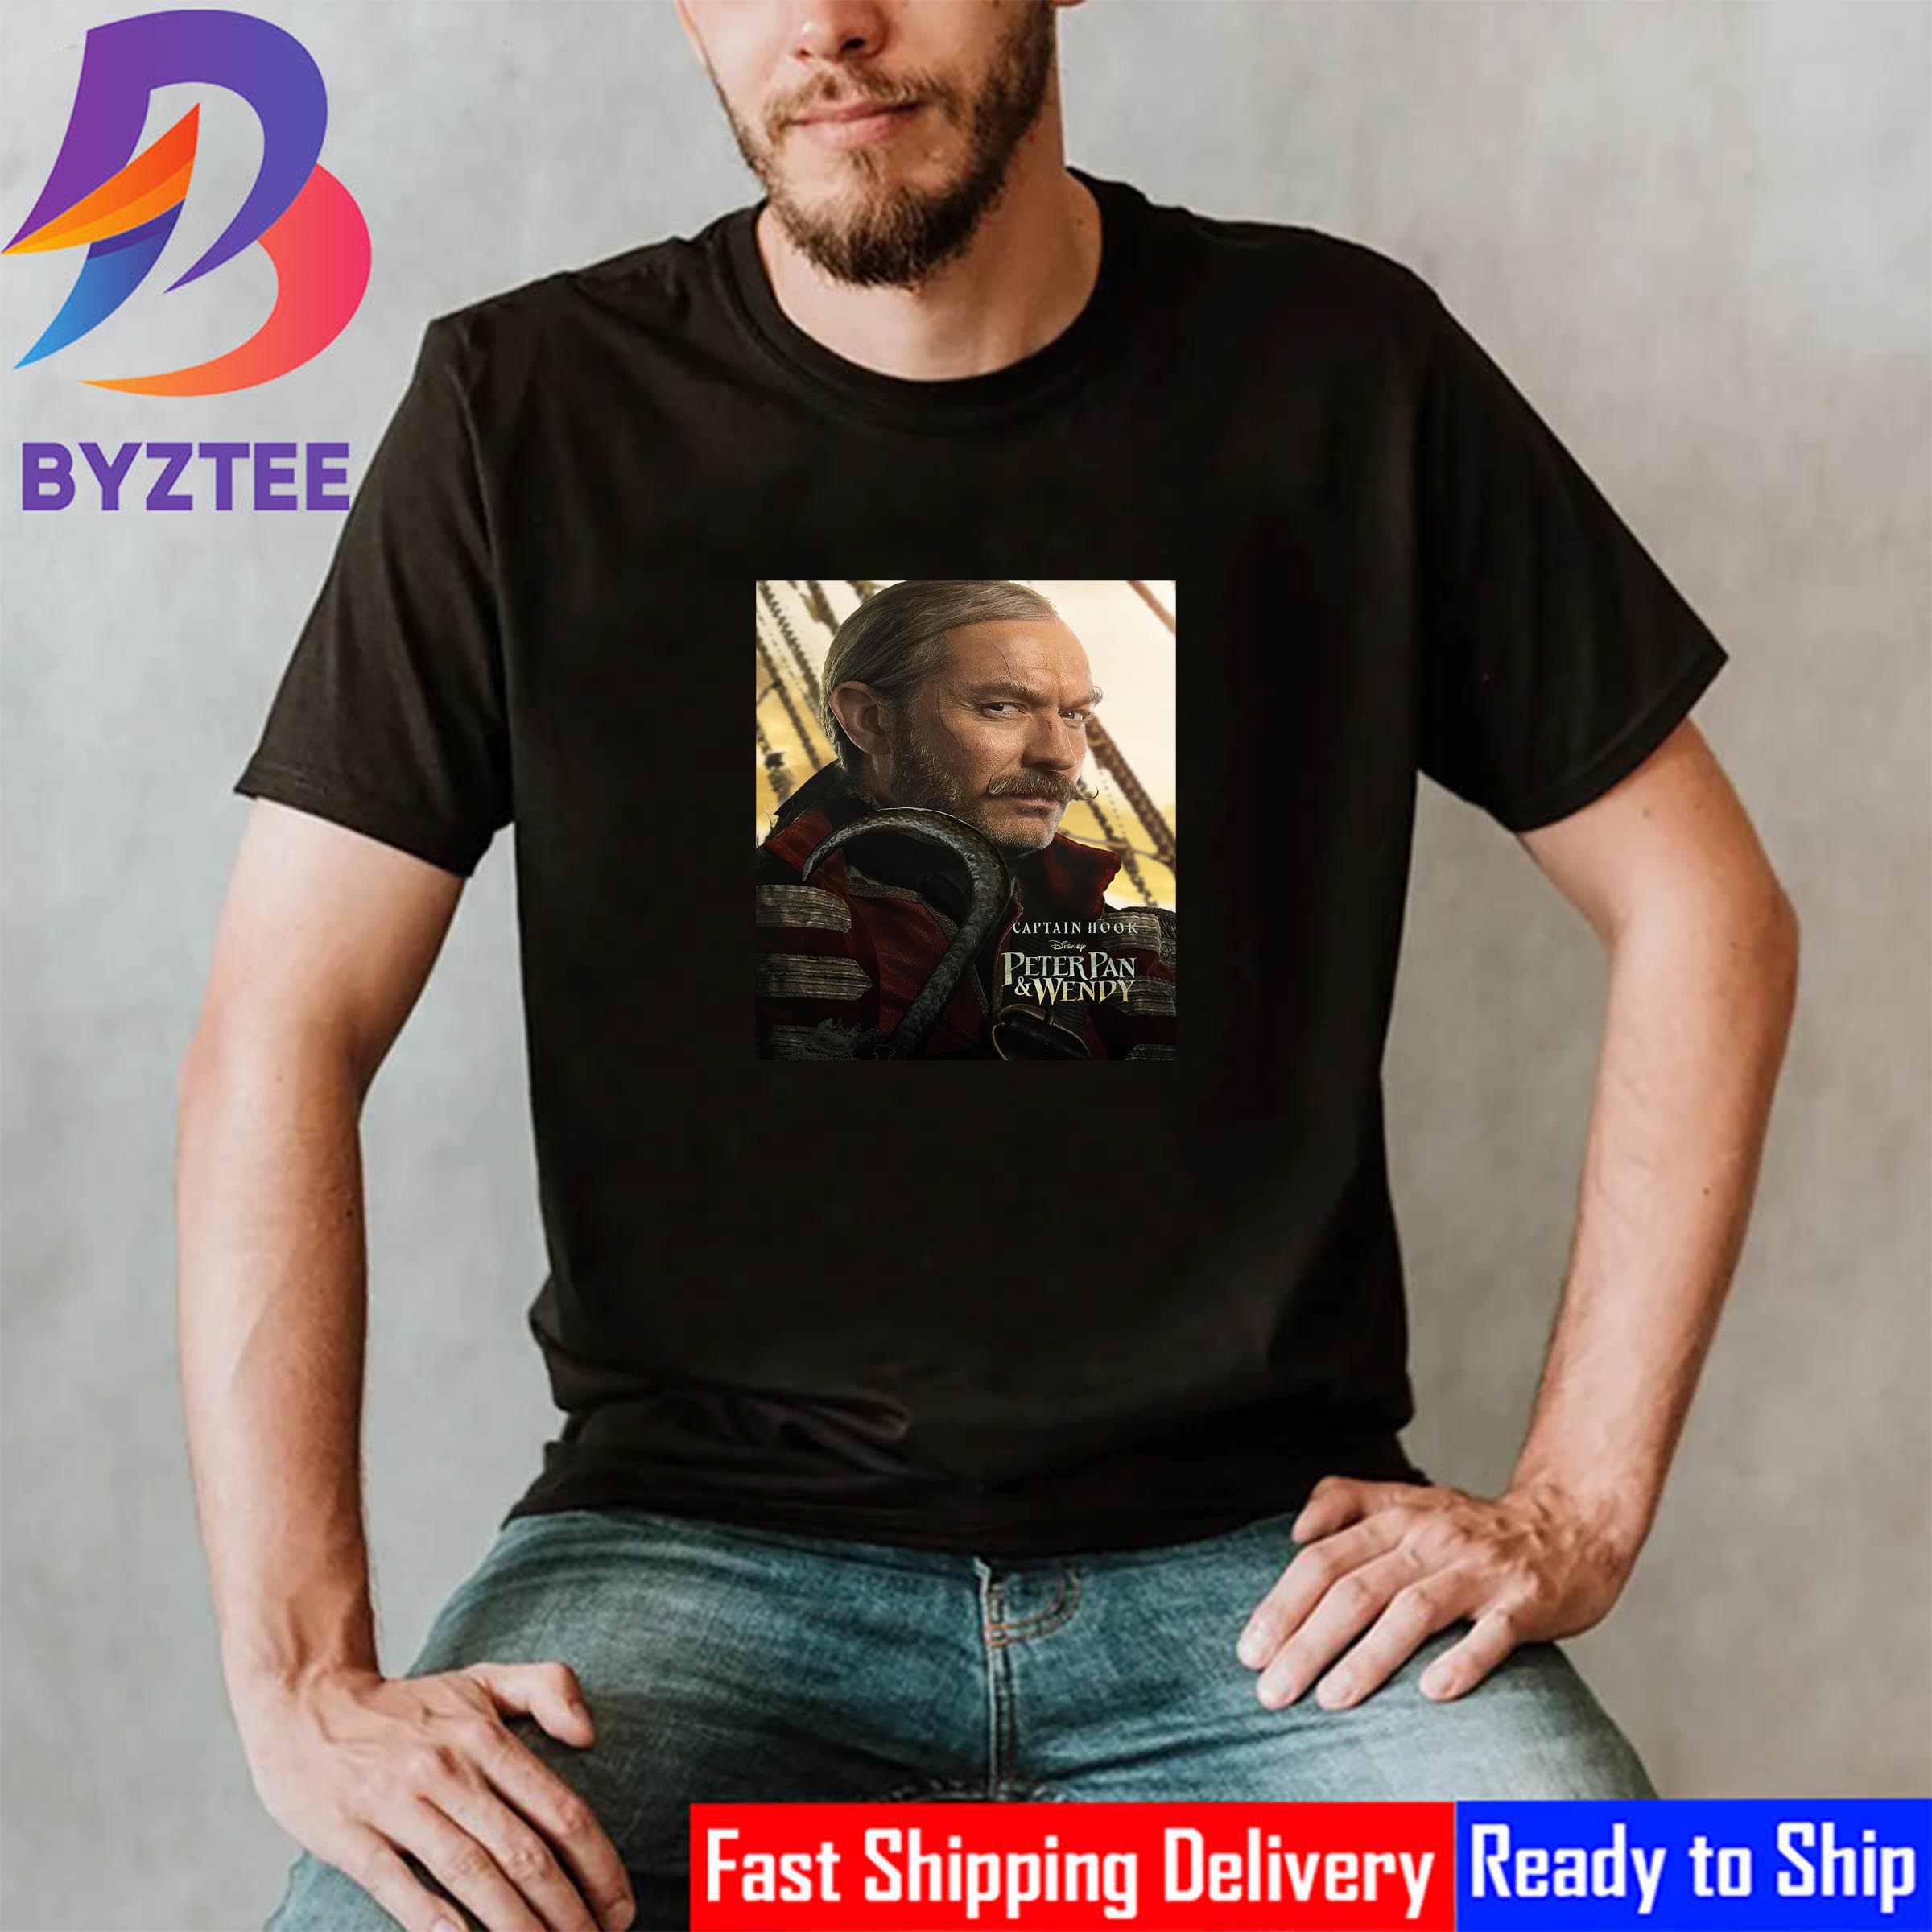 Jude Law As Captain Hook In Peter Pan And Wendy Of Disney Shirt - Byztee